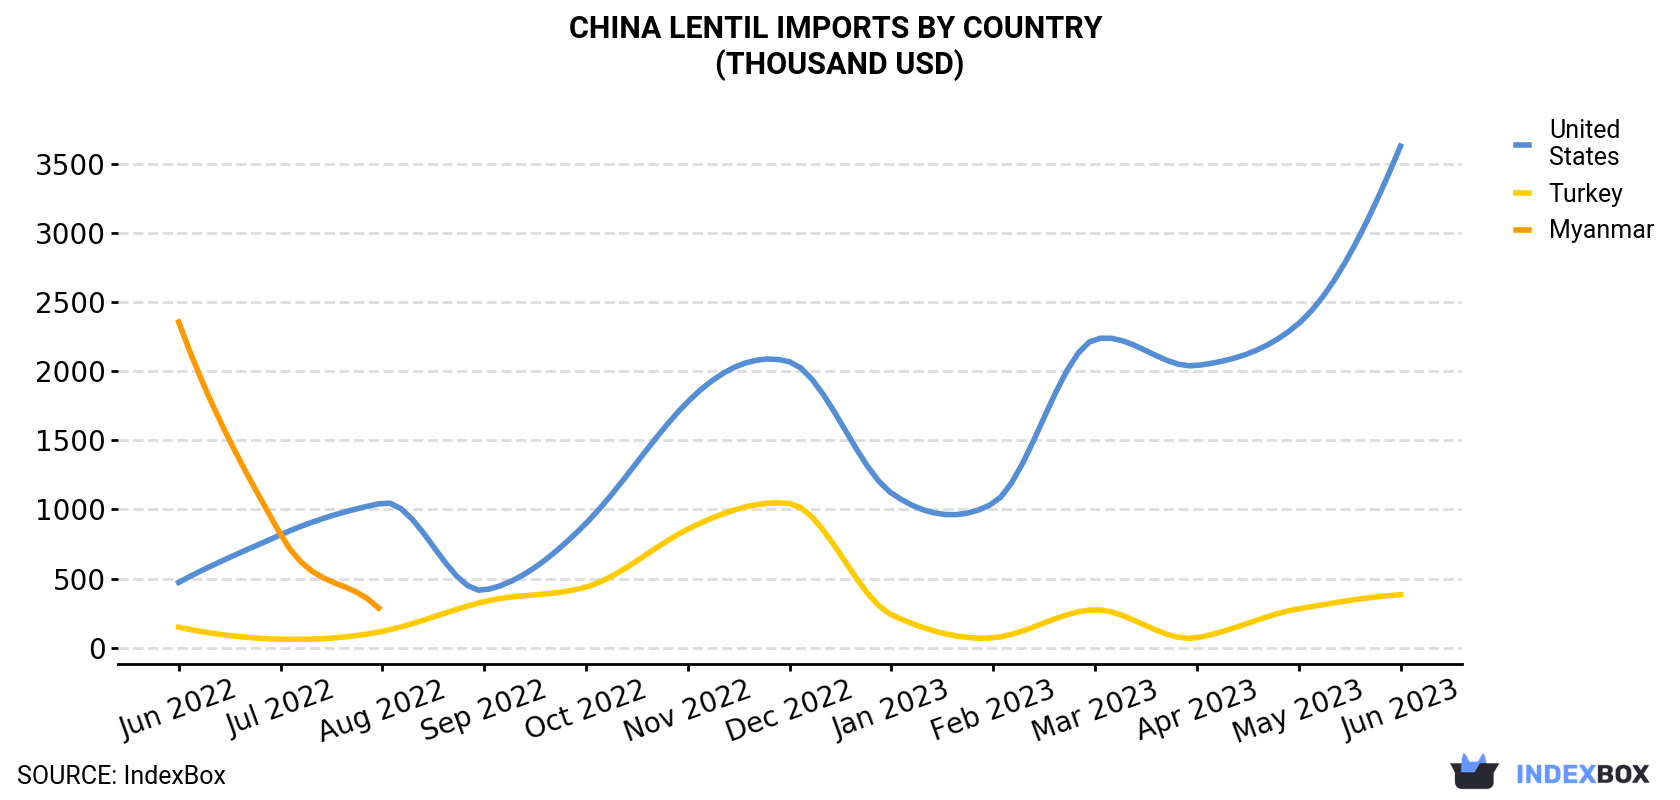 China Lentil Imports By Country (Thousand USD)